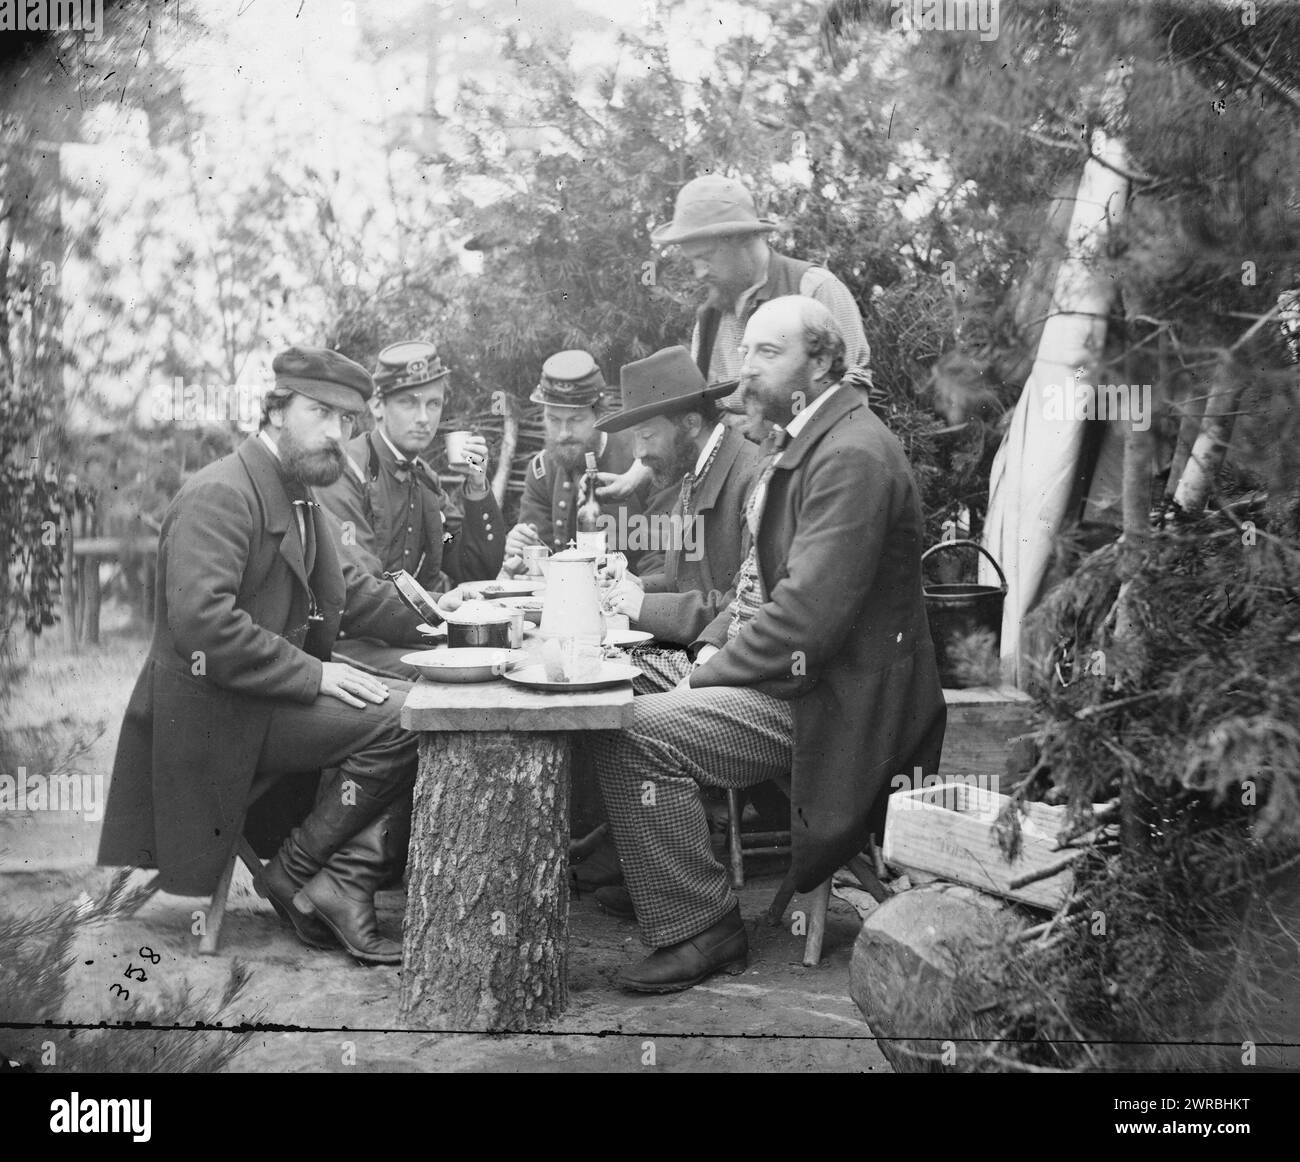 Yorktown, Virginia (vicinity). Comte de Paris, Duc de Chartres, Prince de Joinville and friends at lunch. Camp Winfield Scott, Gibson, James F., 1828-, photographer, 1862 May 3., United States, History, Civil War, 1861-1865, Glass negatives, 1860-1870, Stereographs, 1860-1870, 1 negative: glass, stereograph, wet collodion, 4 x 10 in Stock Photo